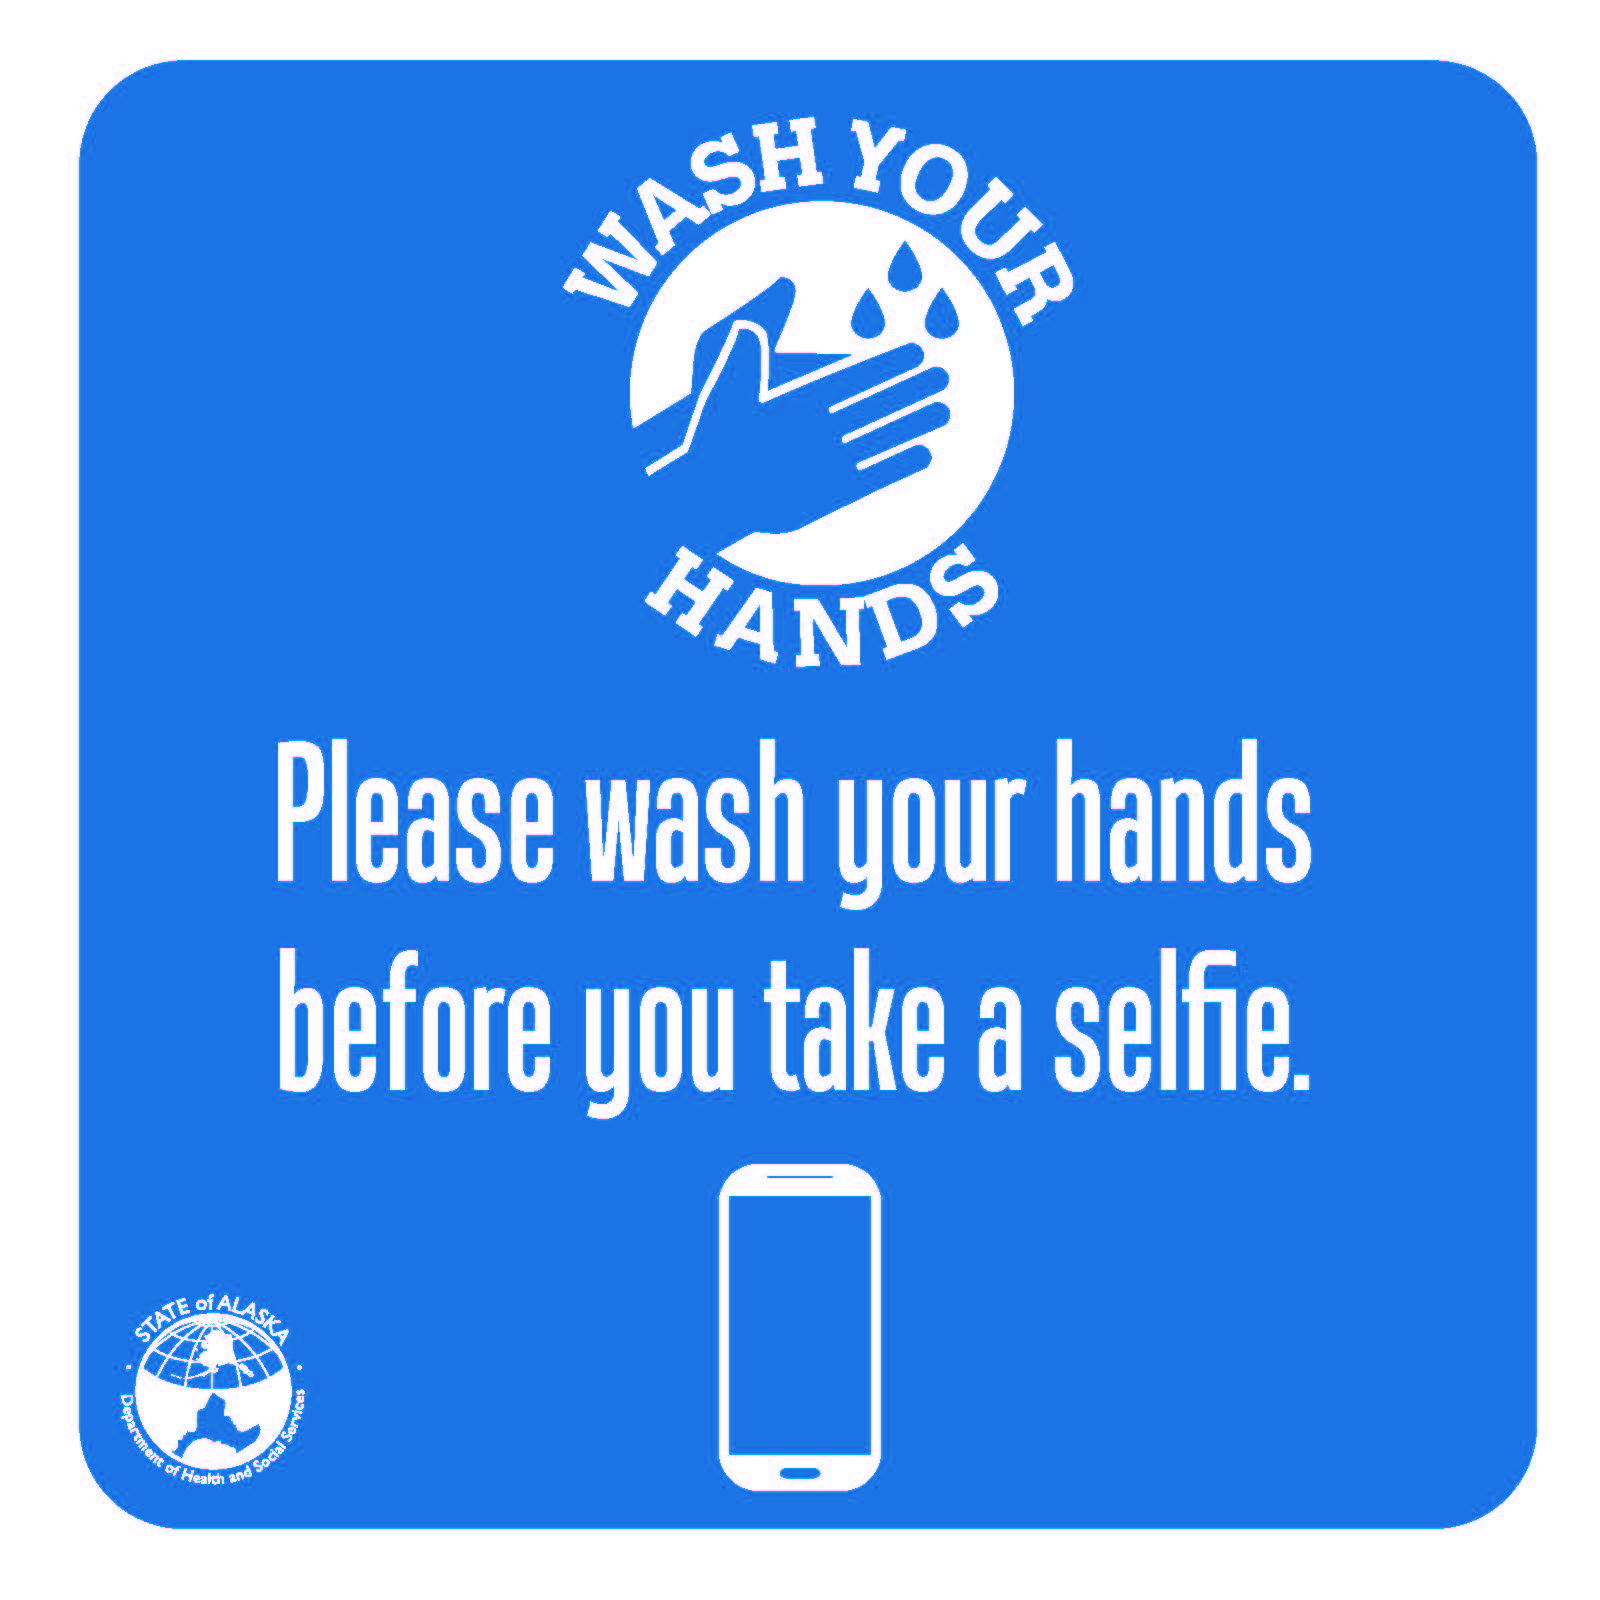 Wash your hands: Please wash your hands before taking a selfie.